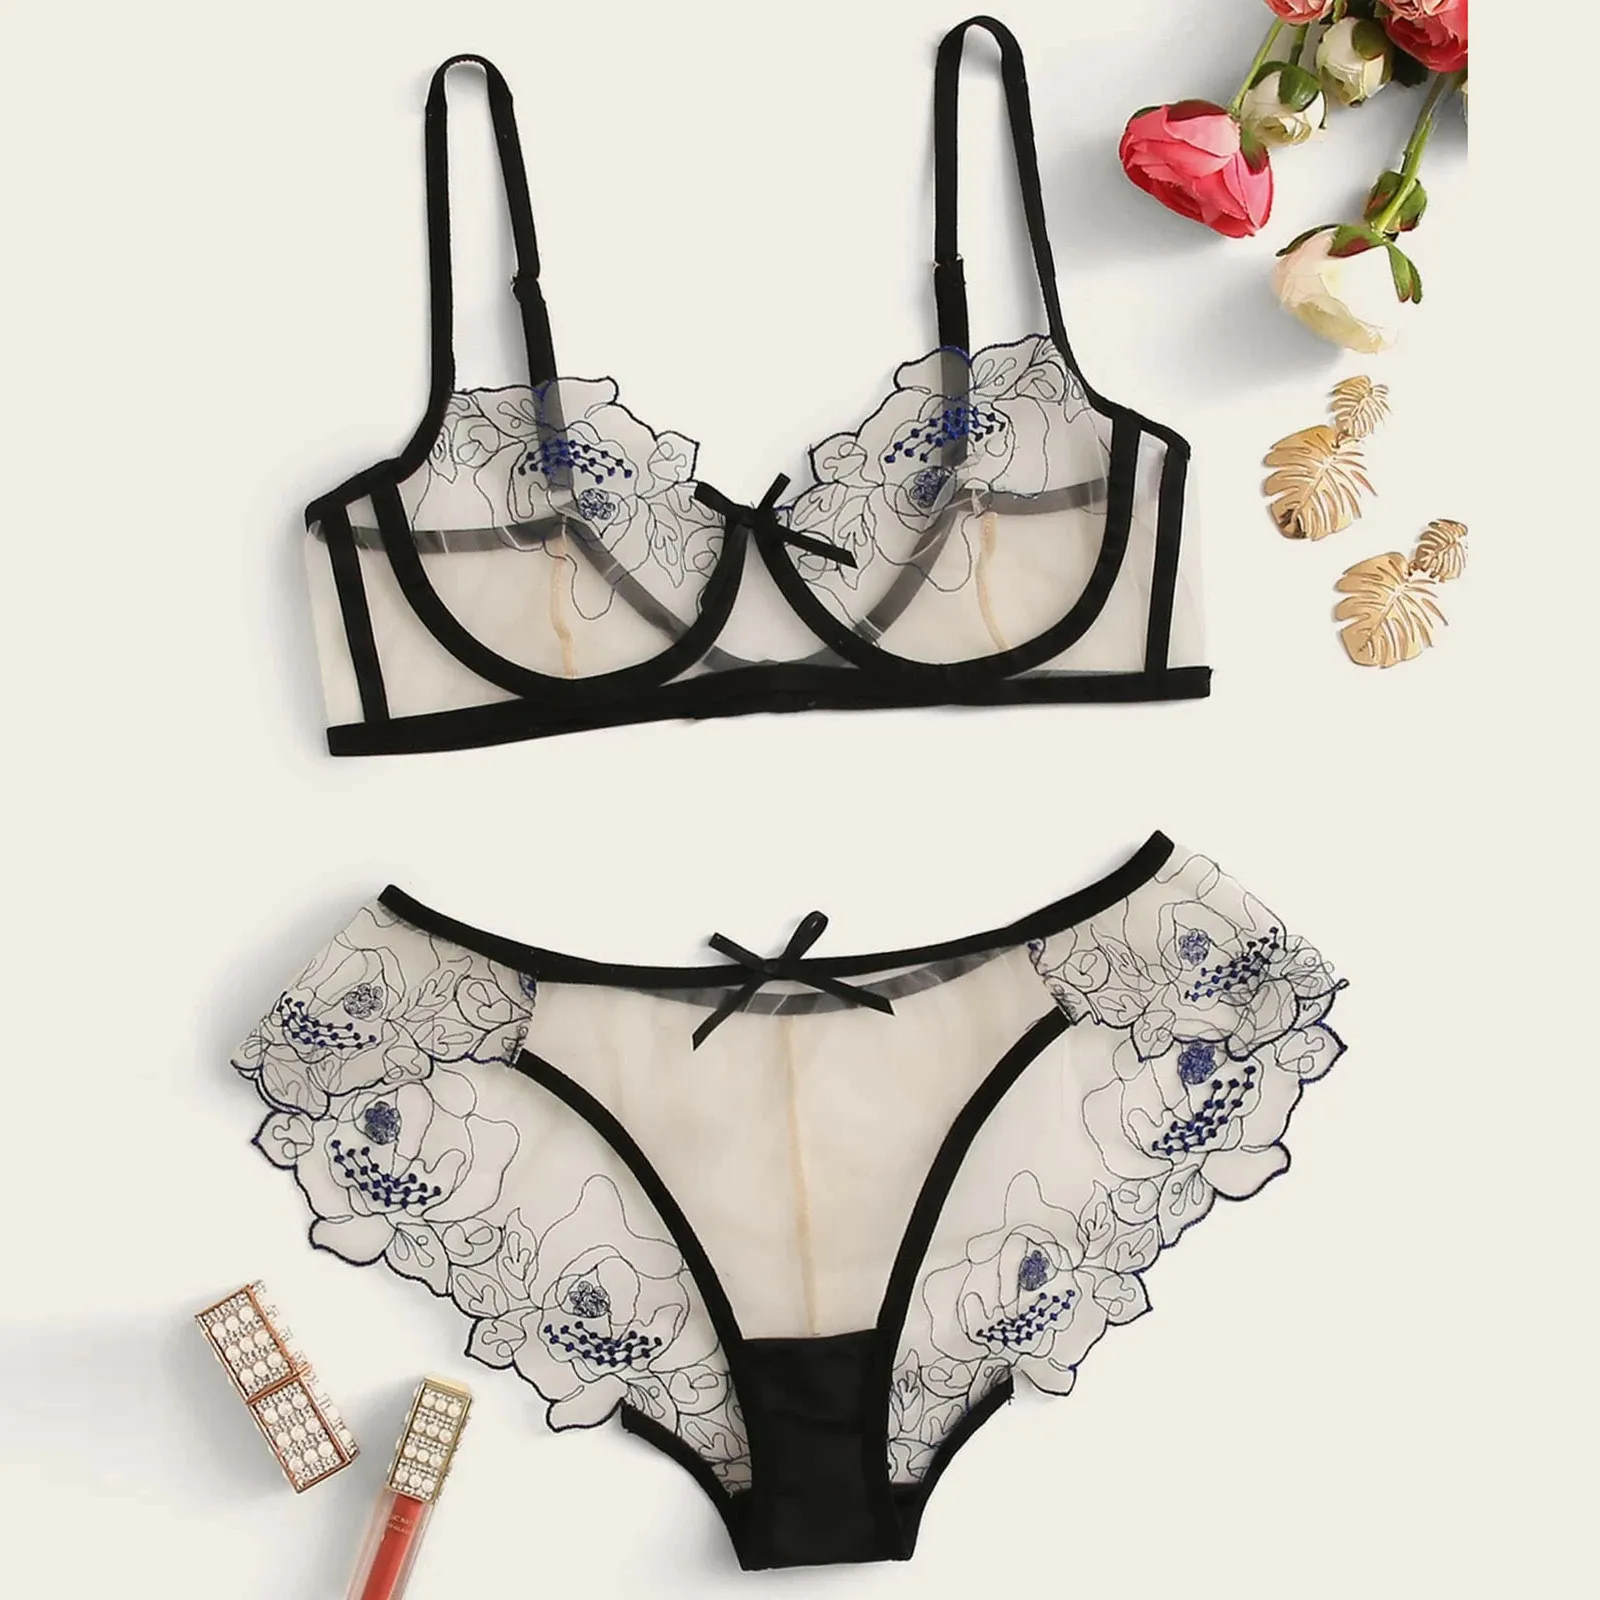 

New women's lace embroidered underwear underwire gather bra and panty set thin mesh see-through sexy erotic lingerie thong set